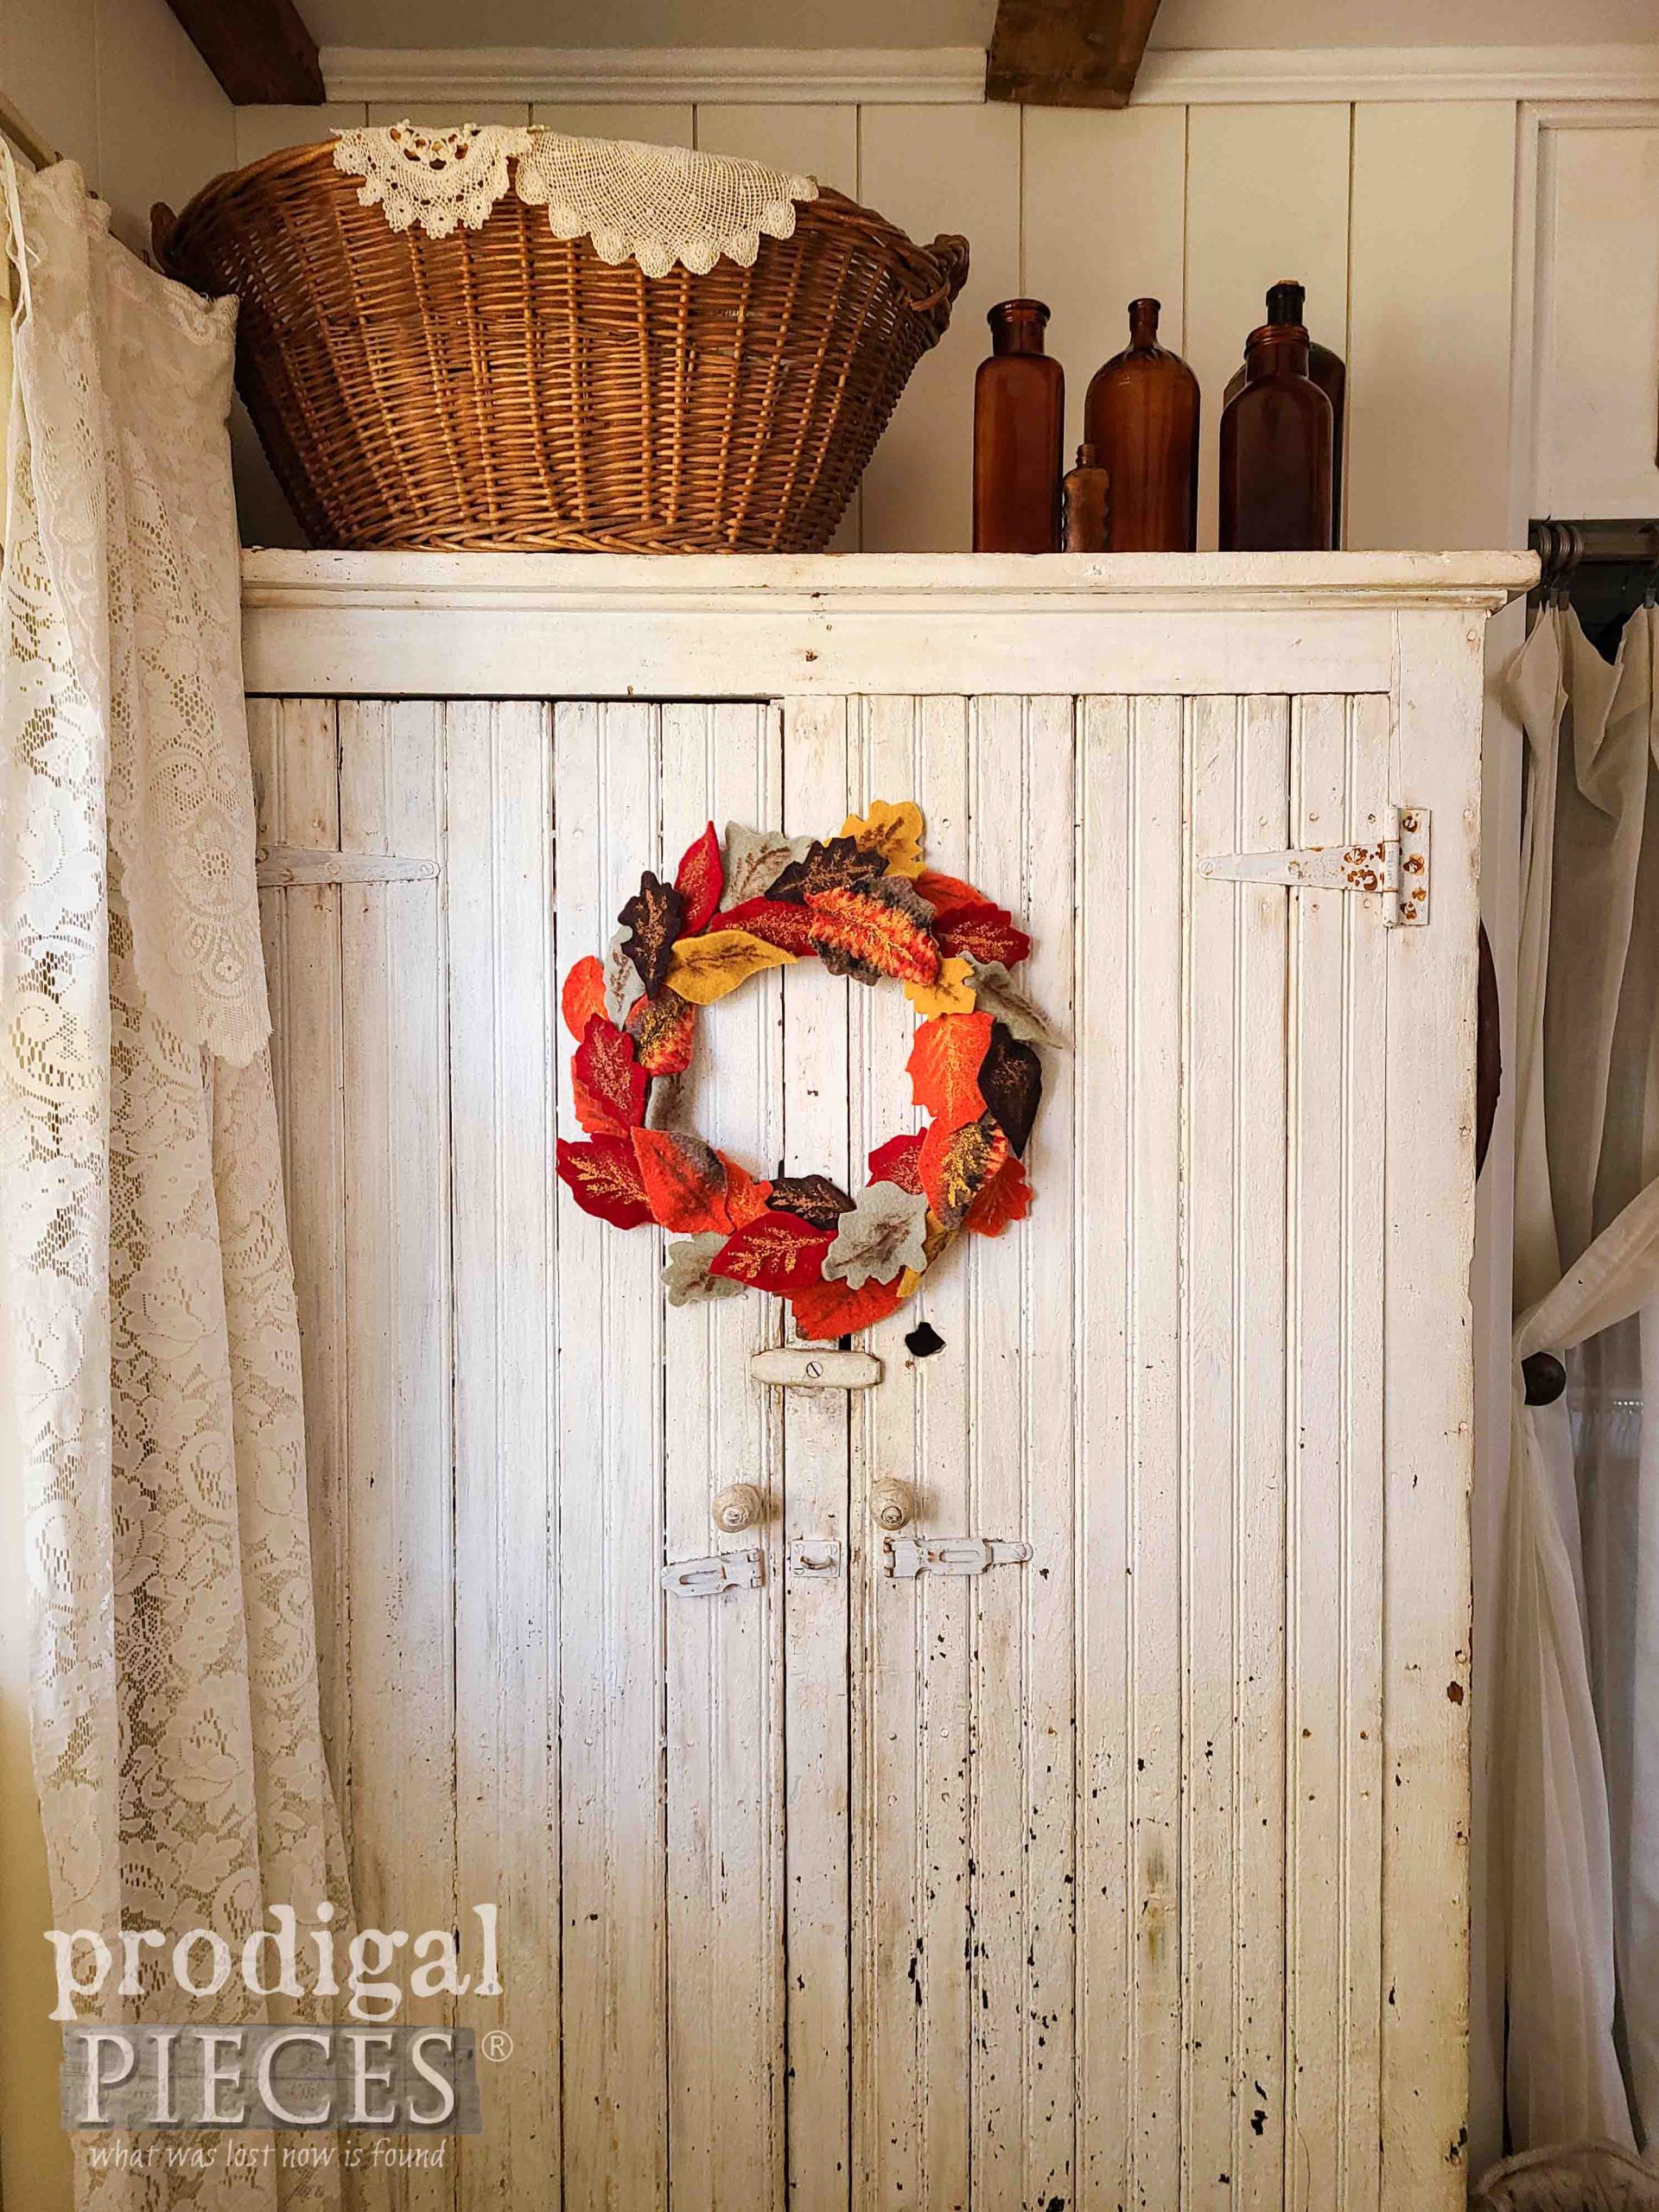 DIY Farmhouse Felted Sweater Fall Wreath Tutorial by Larissa of Prodigal Pieces | prodigalpieces.com #prodigalpieces #fall #diy #crafts #farmhouse